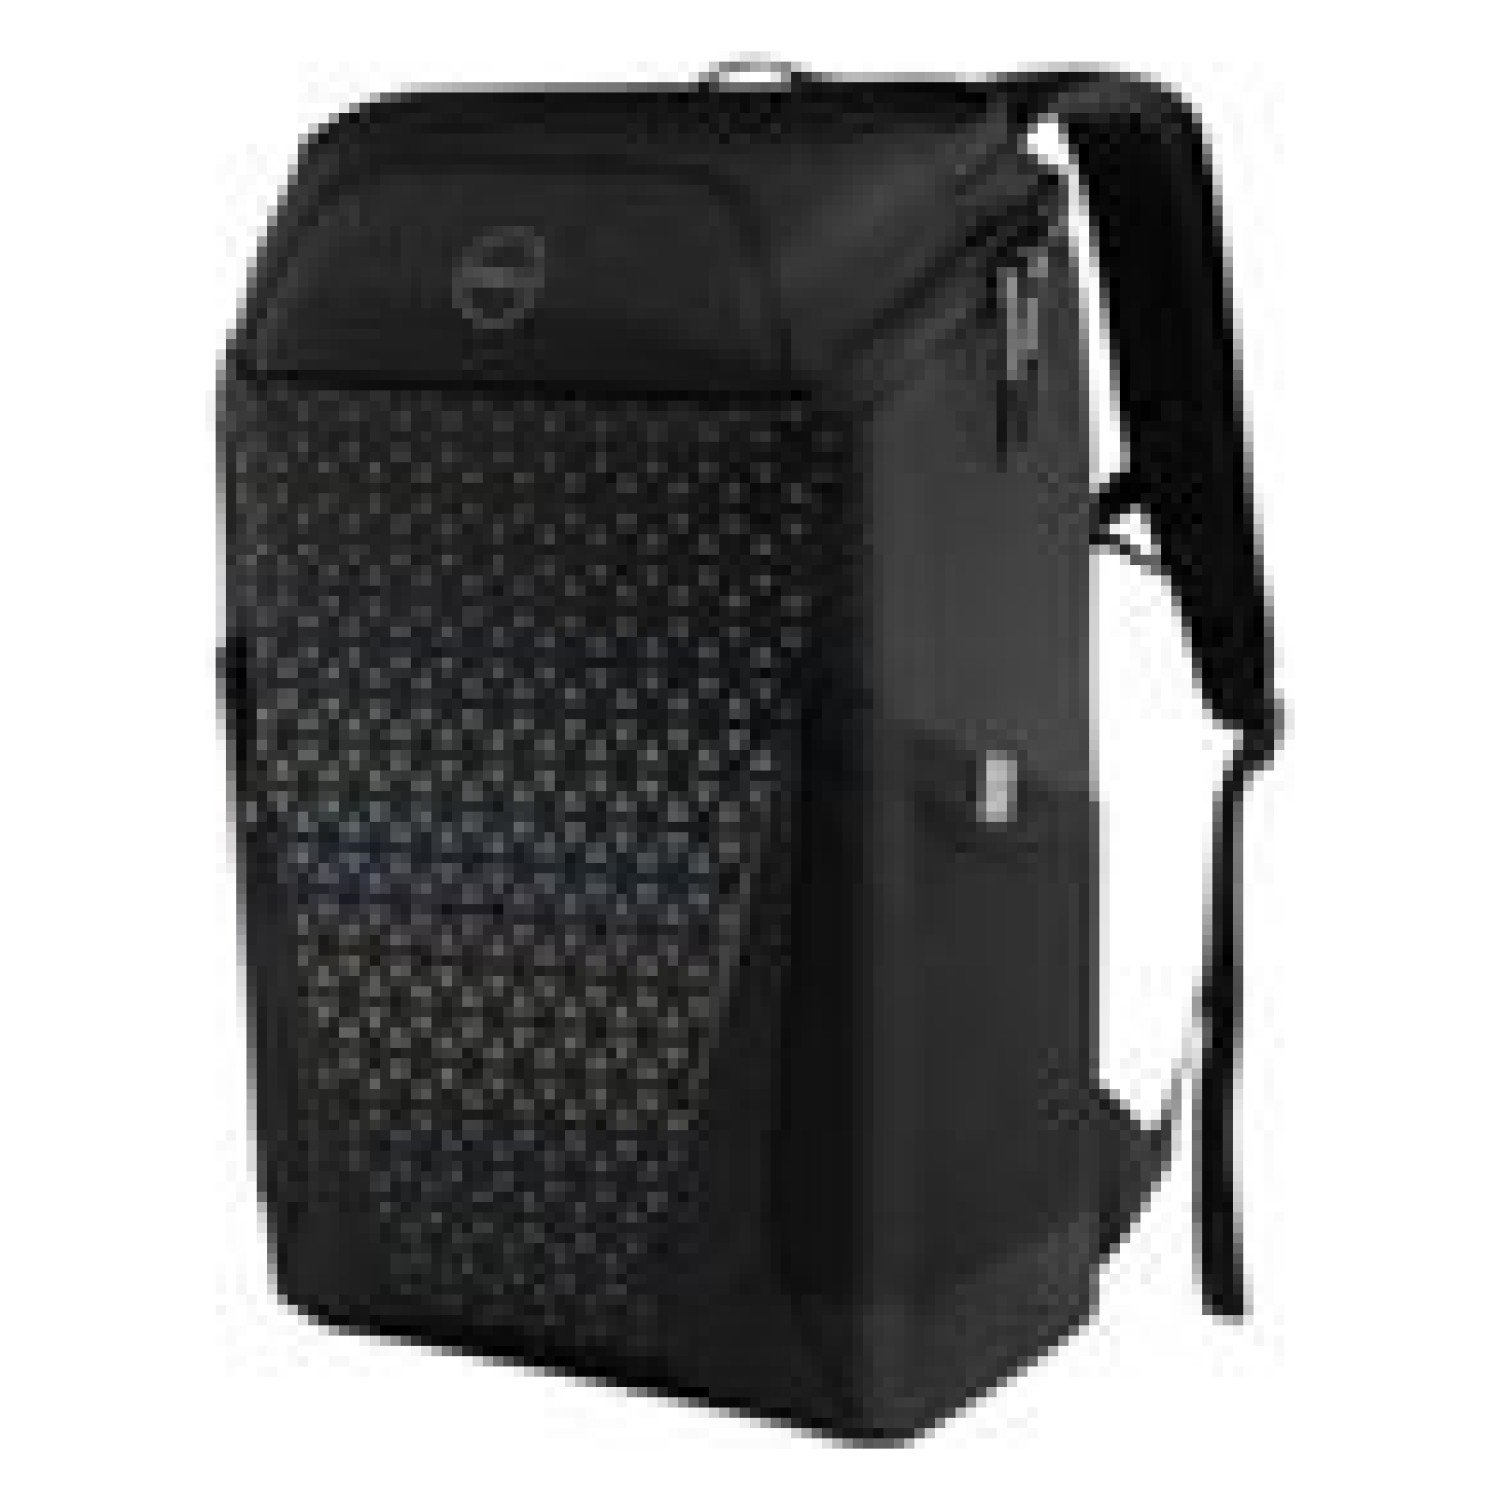 DELL Gaming Backpack 17 GM1720PM